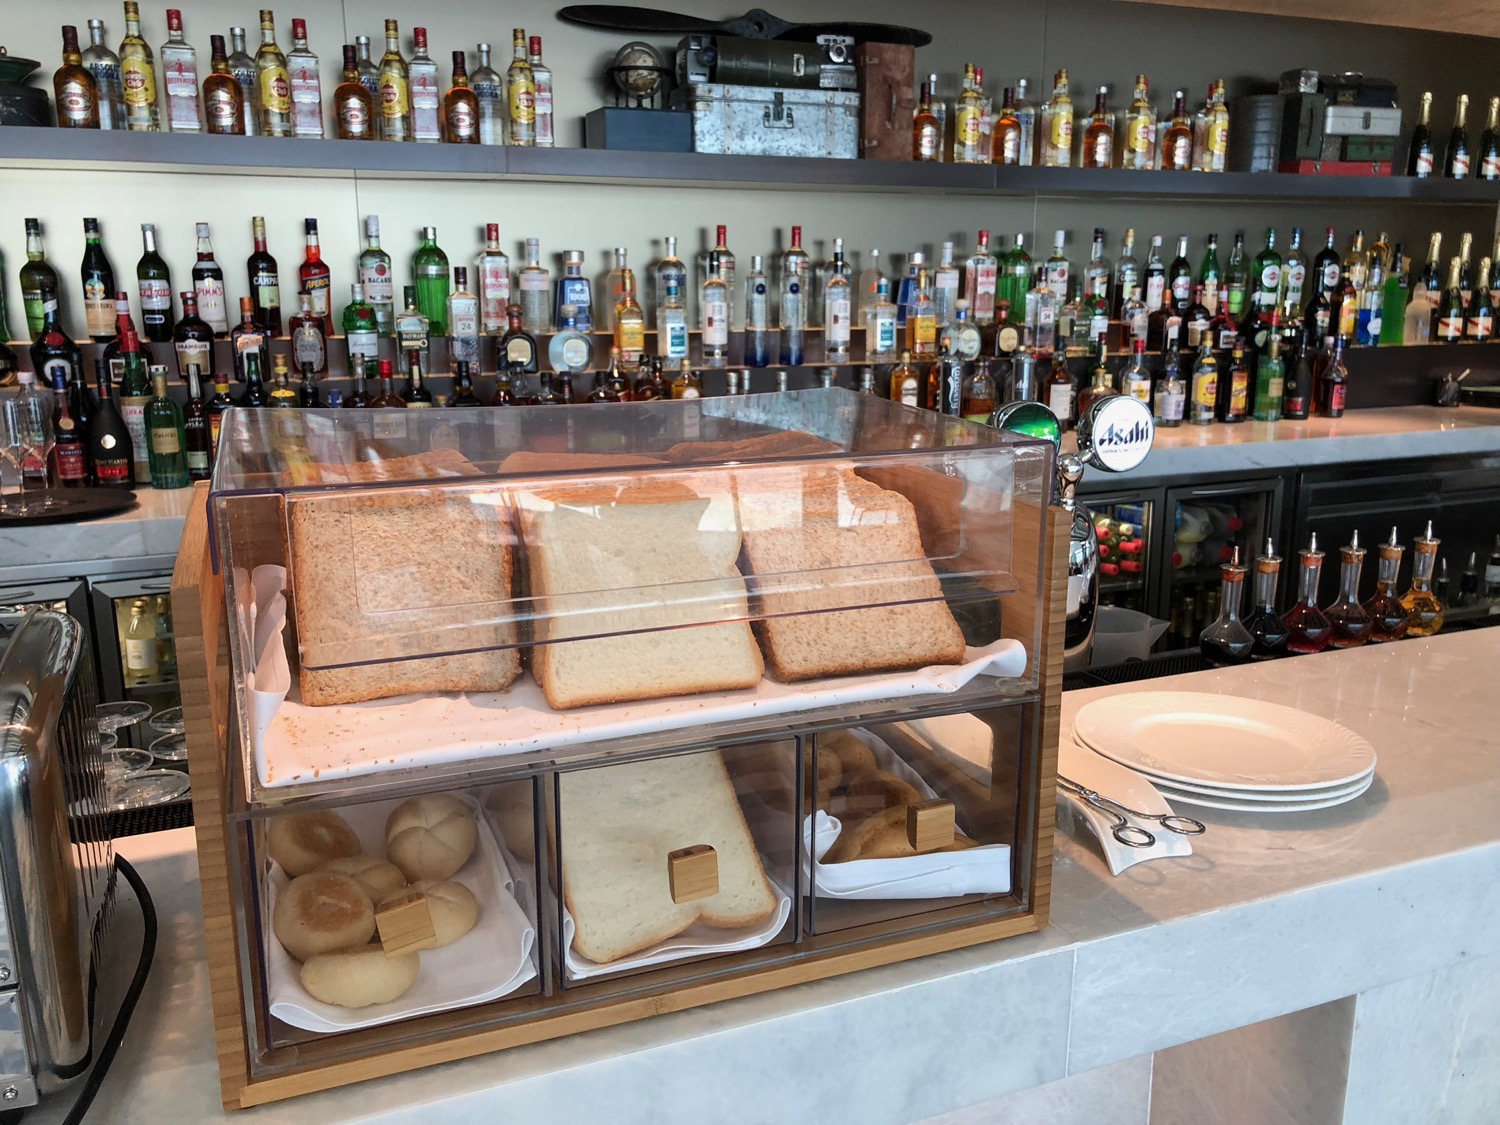 a display case with bread in it